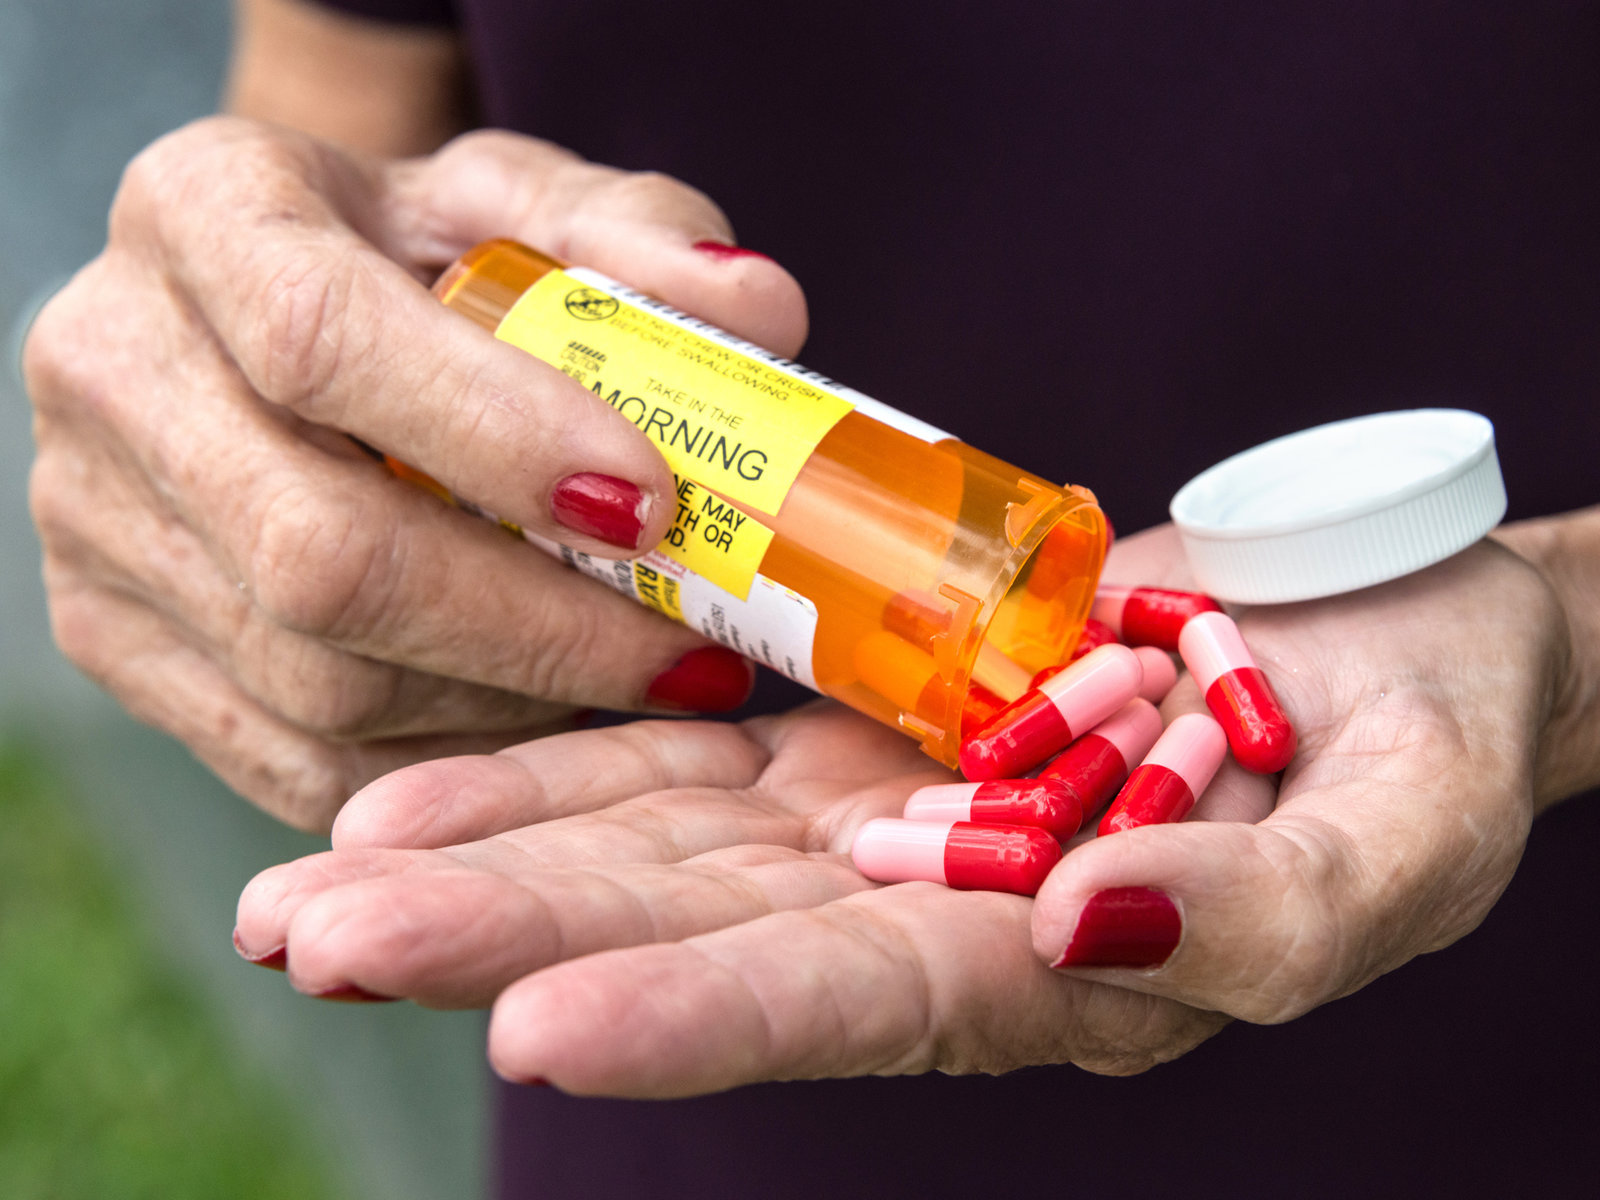 Do You Need All Those Meds? How To Talk To Your Doctor About Cutting Back